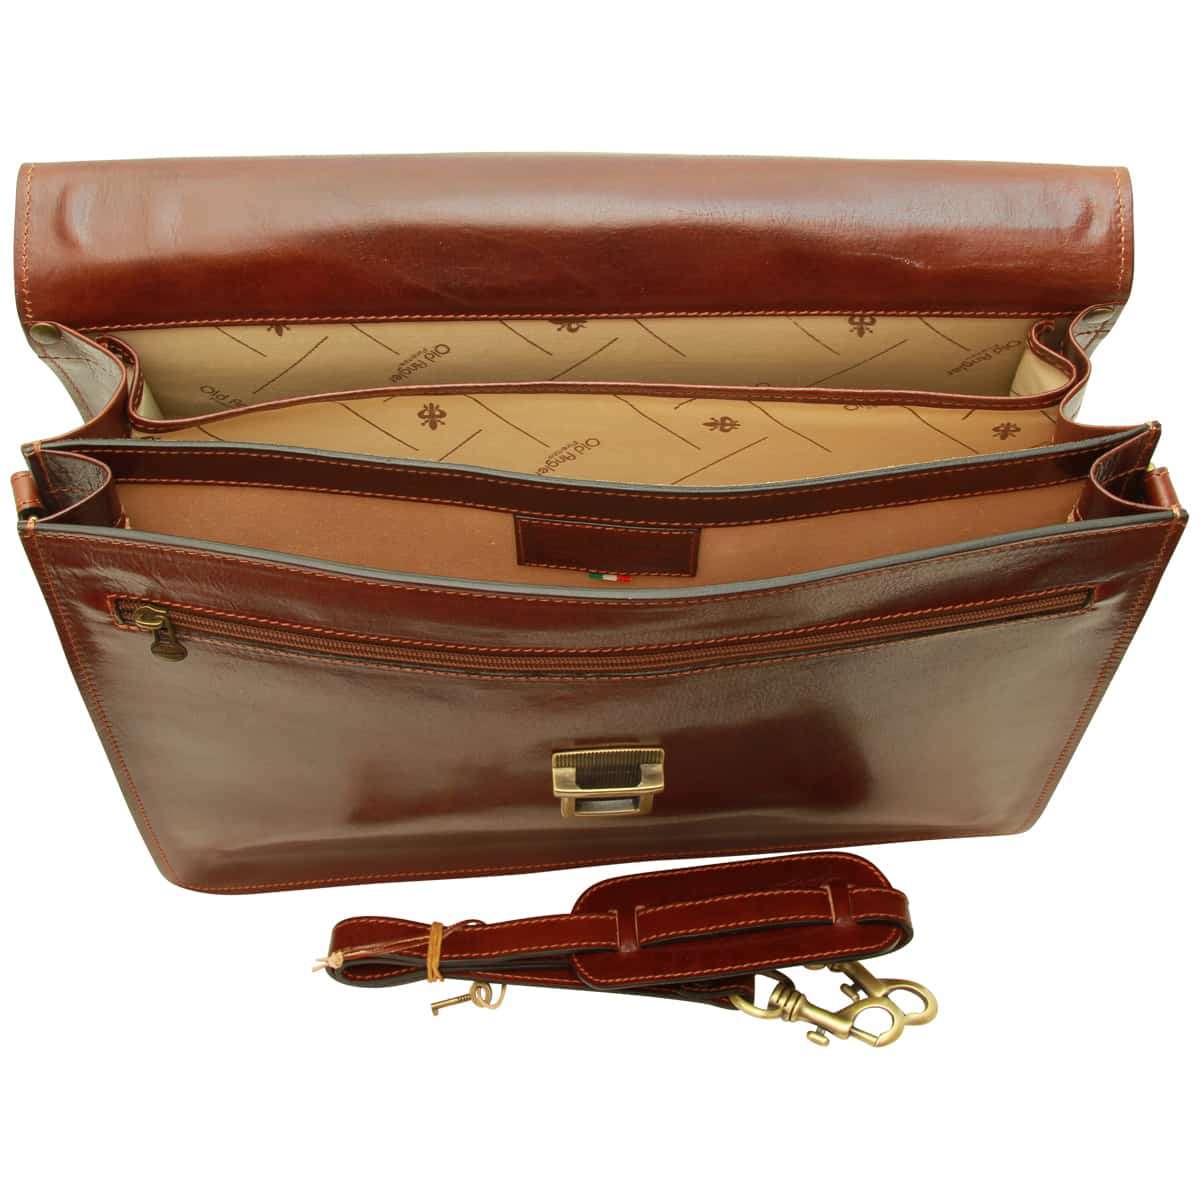 Leather Laptop Briefcase - Brown | 052805MA US | Old Angler Firenze